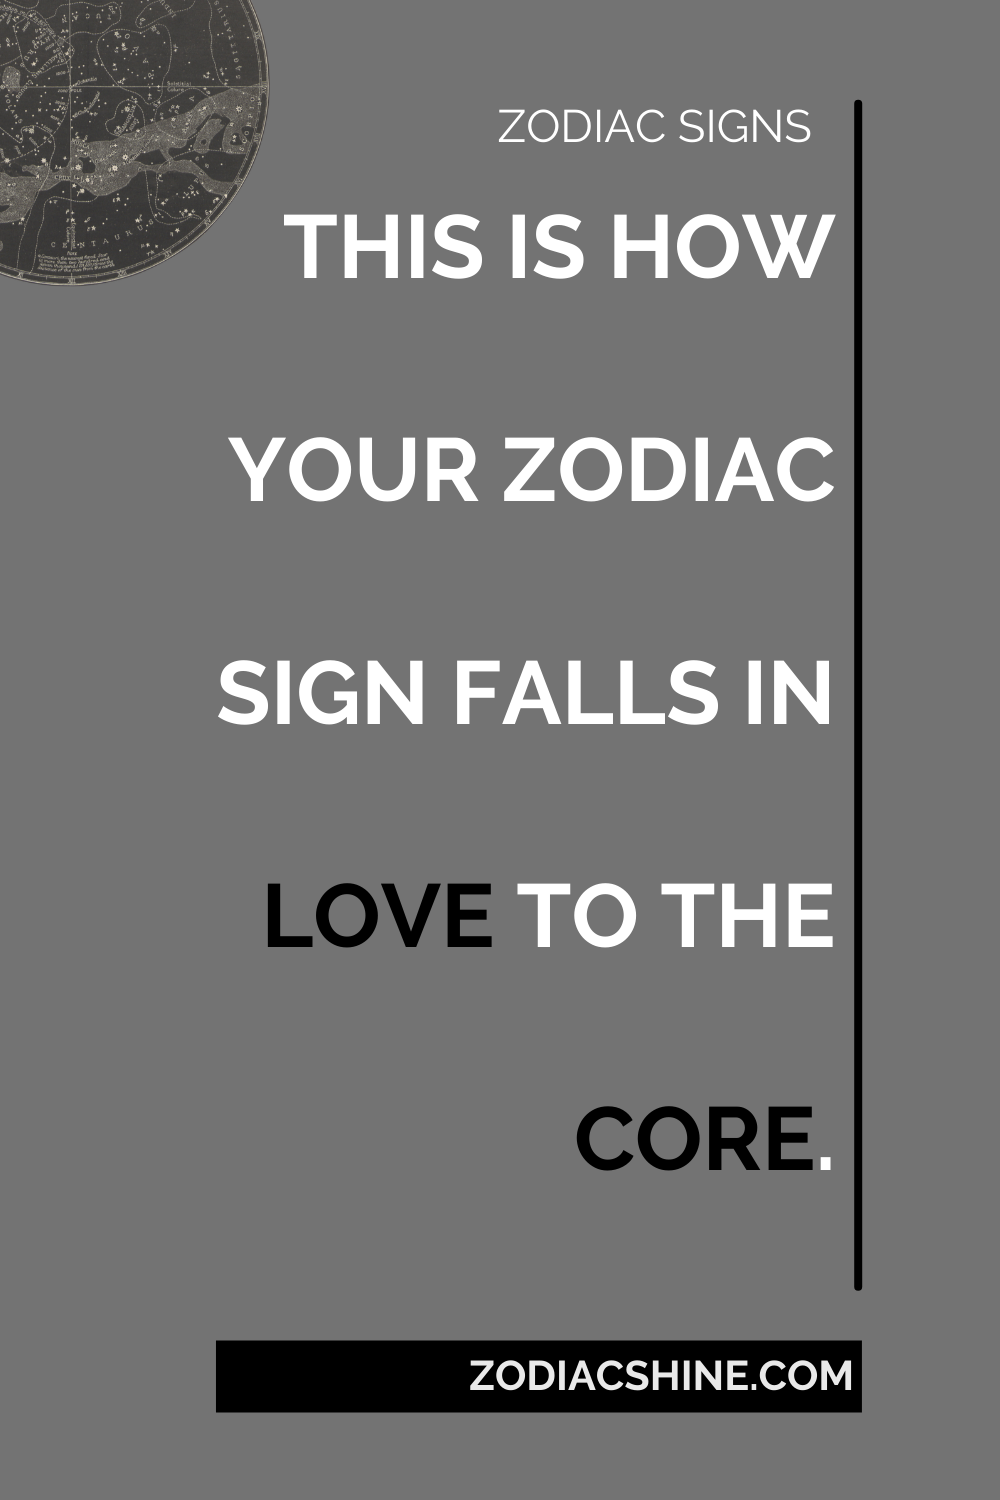 THIS IS HOW YOUR ZODIAC SIGN FALLS IN LOVE TO THE CORE.